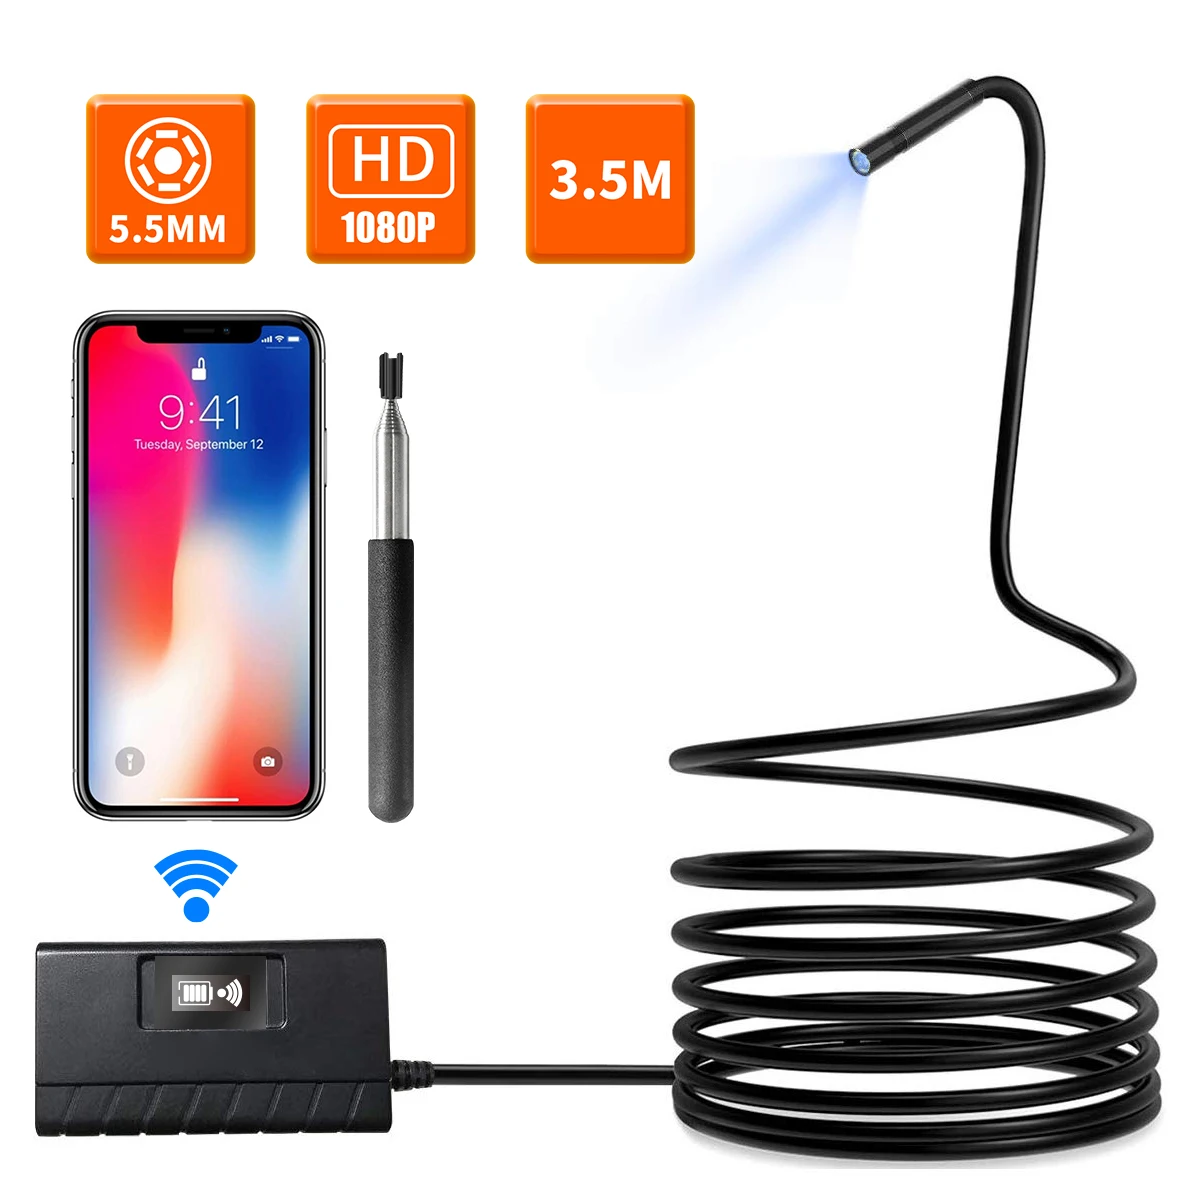 2MP 1080P 5.5MM Wireless WIFI Endoscope Inspection Otoscope Camera CMOS Borescope For Android&ISO Smart Phone Digital Microscope 8mm 1080p 180degree two way articulate steering endoscope otg handheld cmos borescope for android inspection otoscope microscope